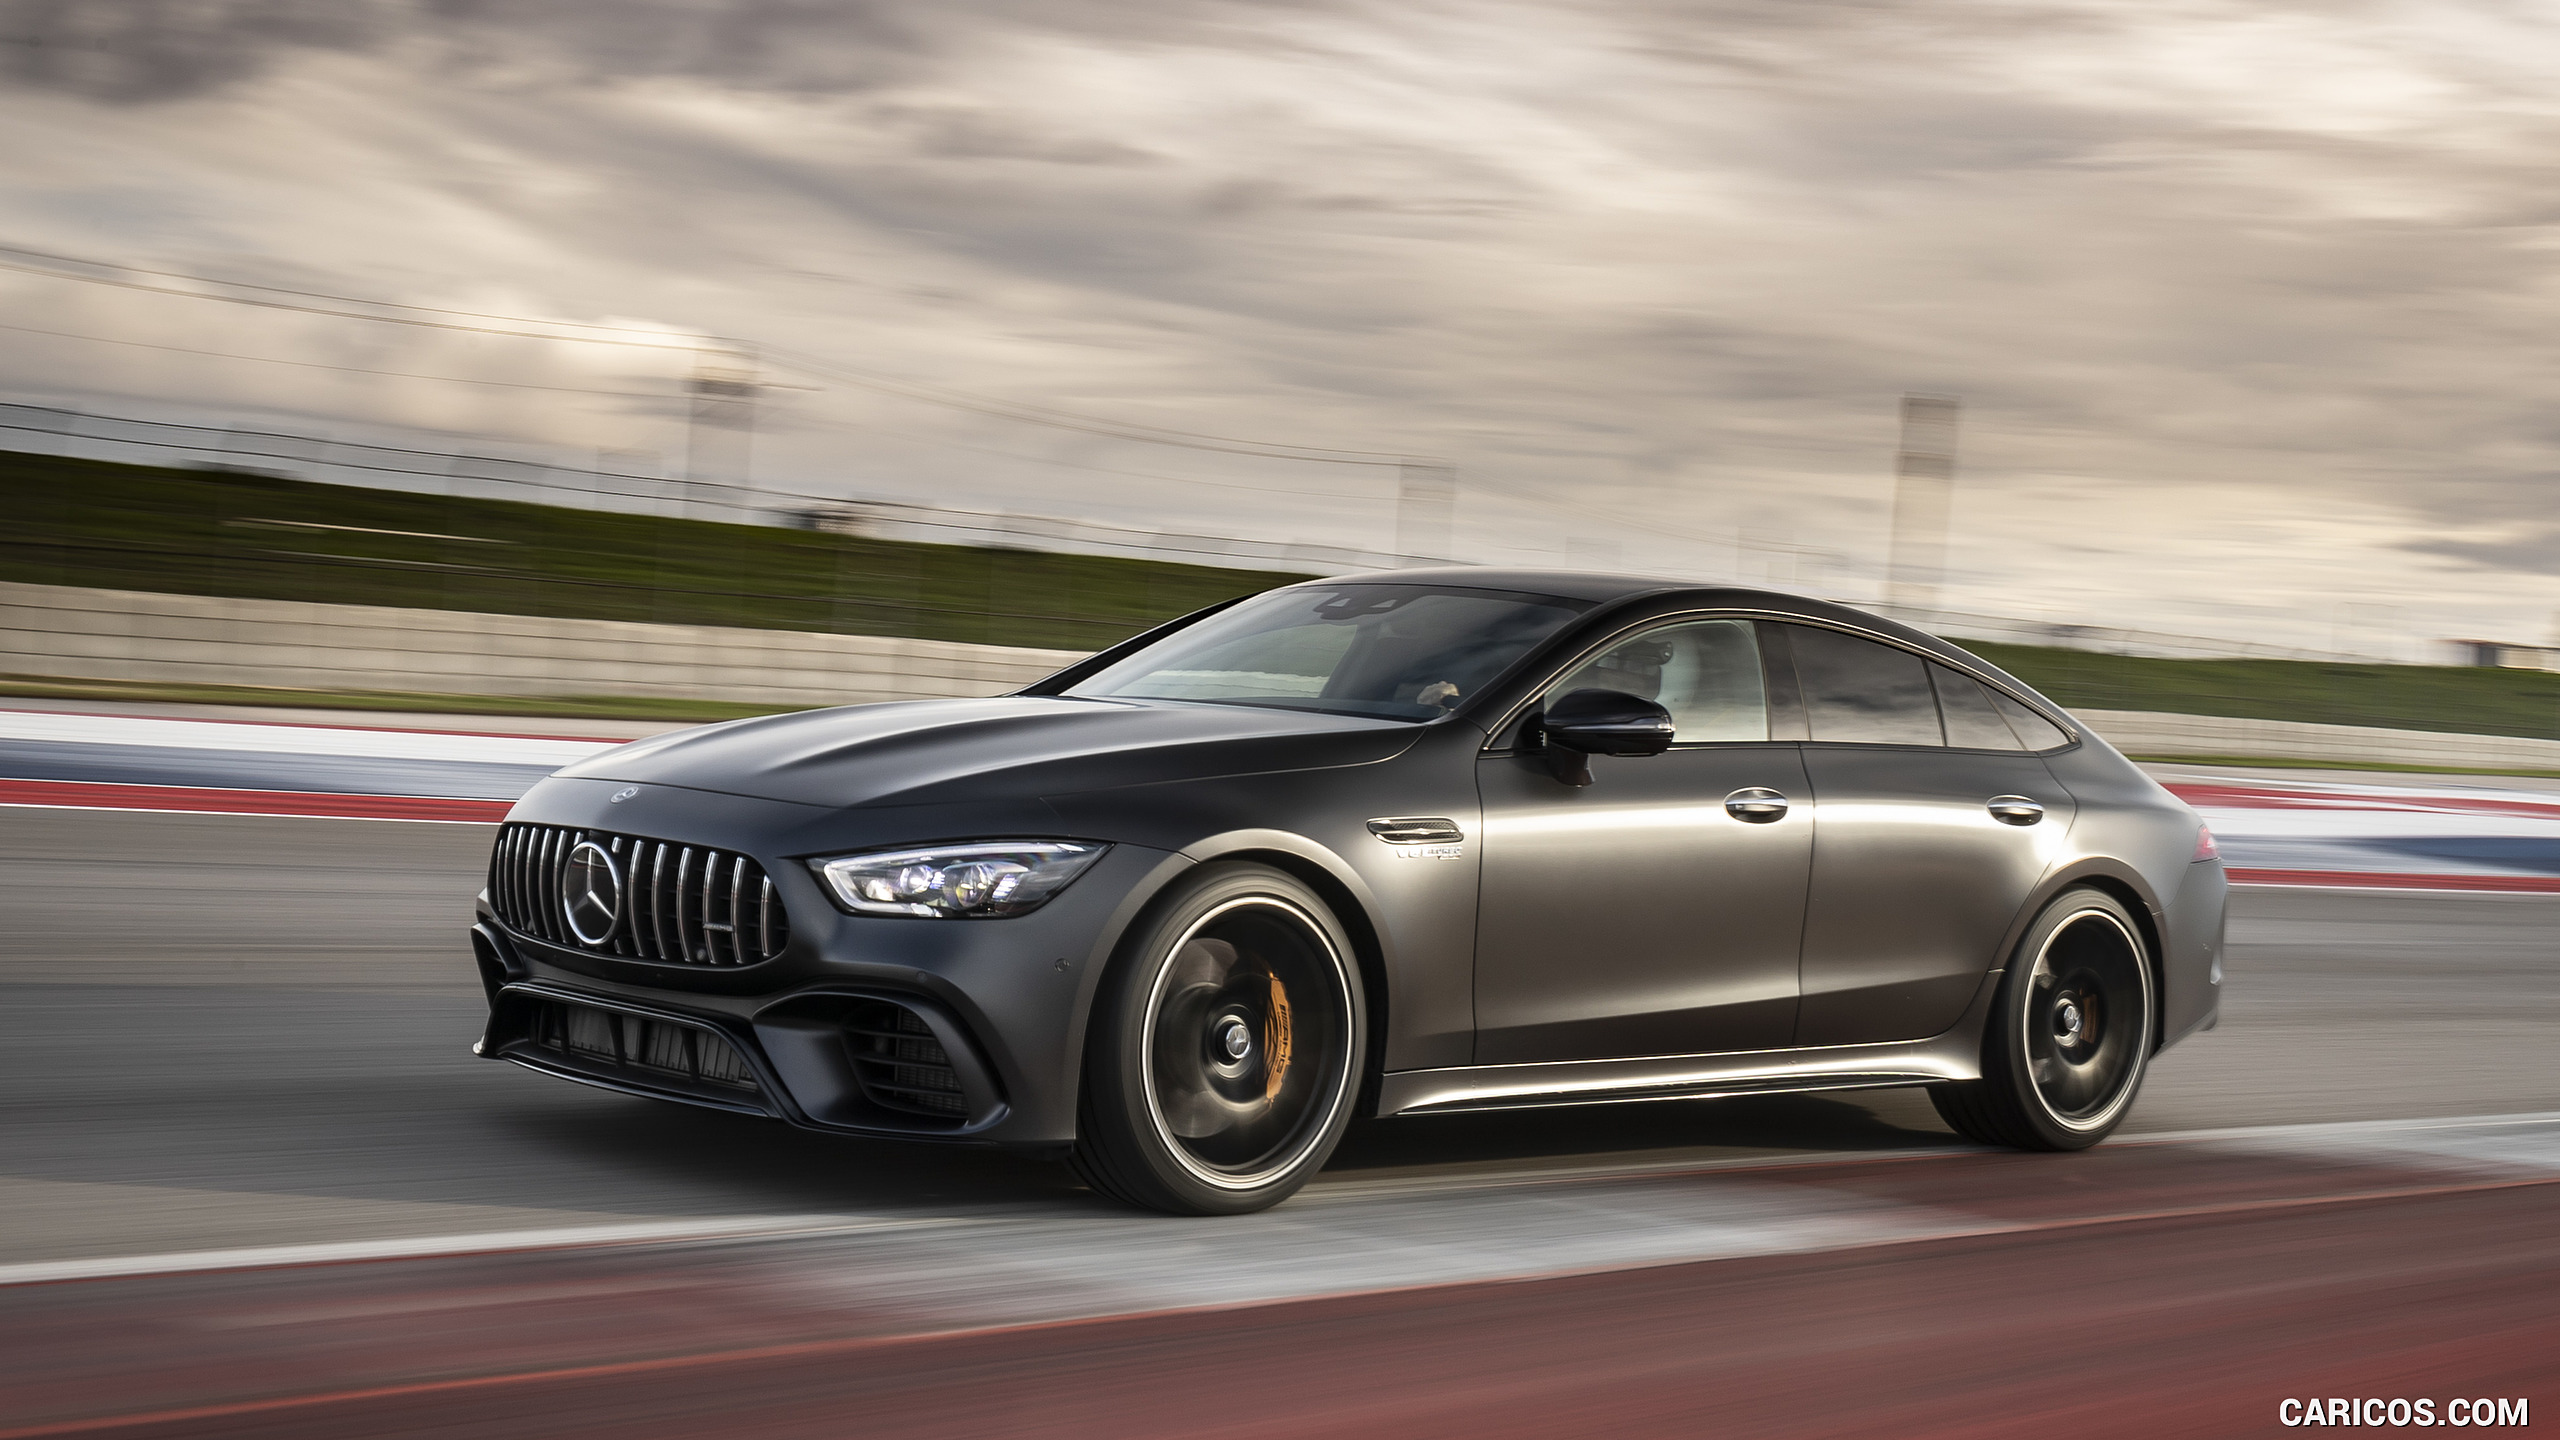 2019 Mercedes-AMG GT 63 S 4MATIC+ 4-Door Coupe - Front Three-Quarter, #174 of 427